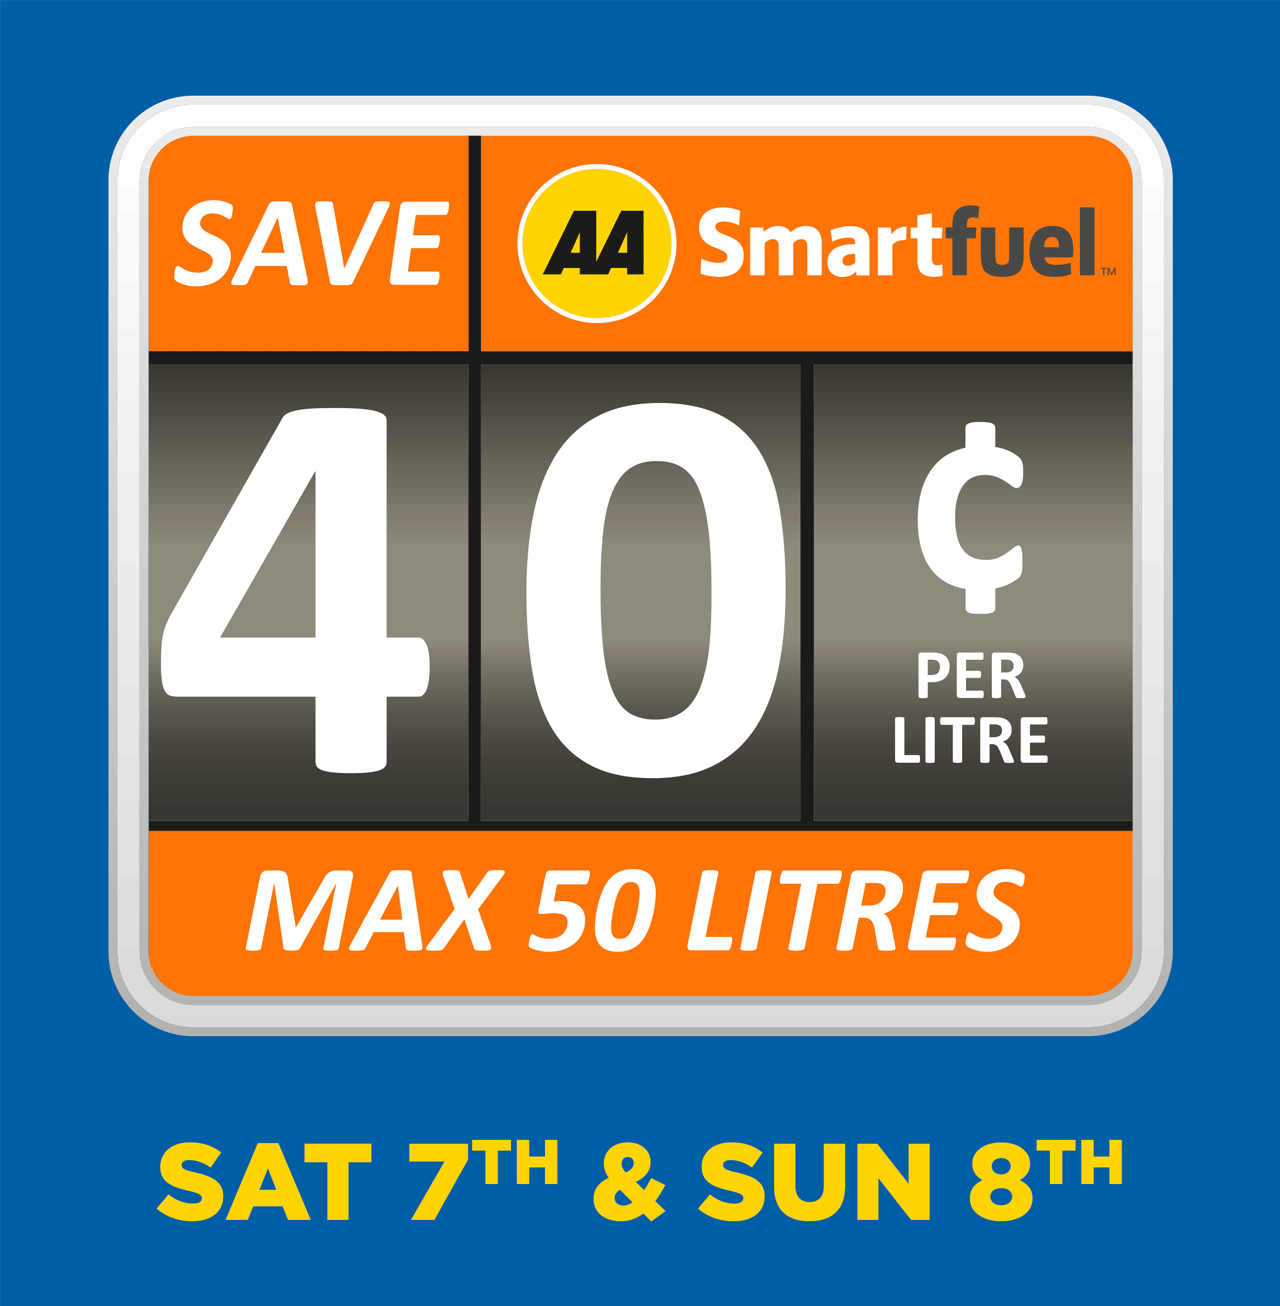 aa-smartfuel-terms-and-conditions